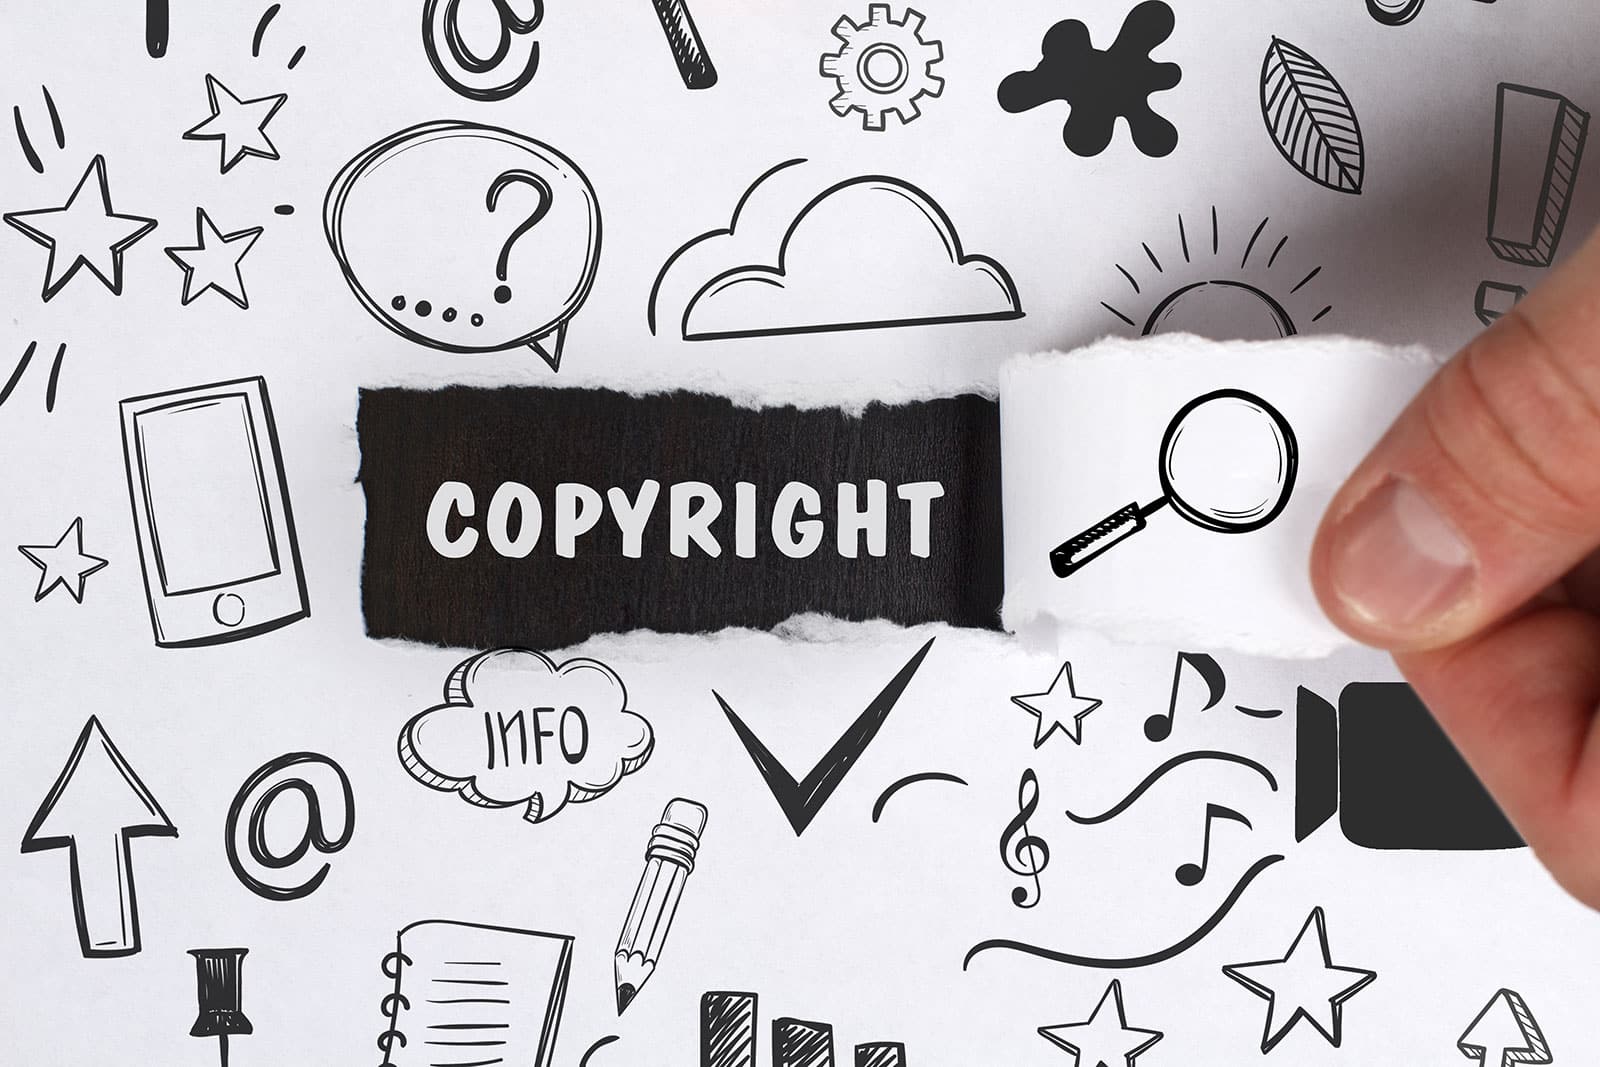 How to spot Image Copyright Scams